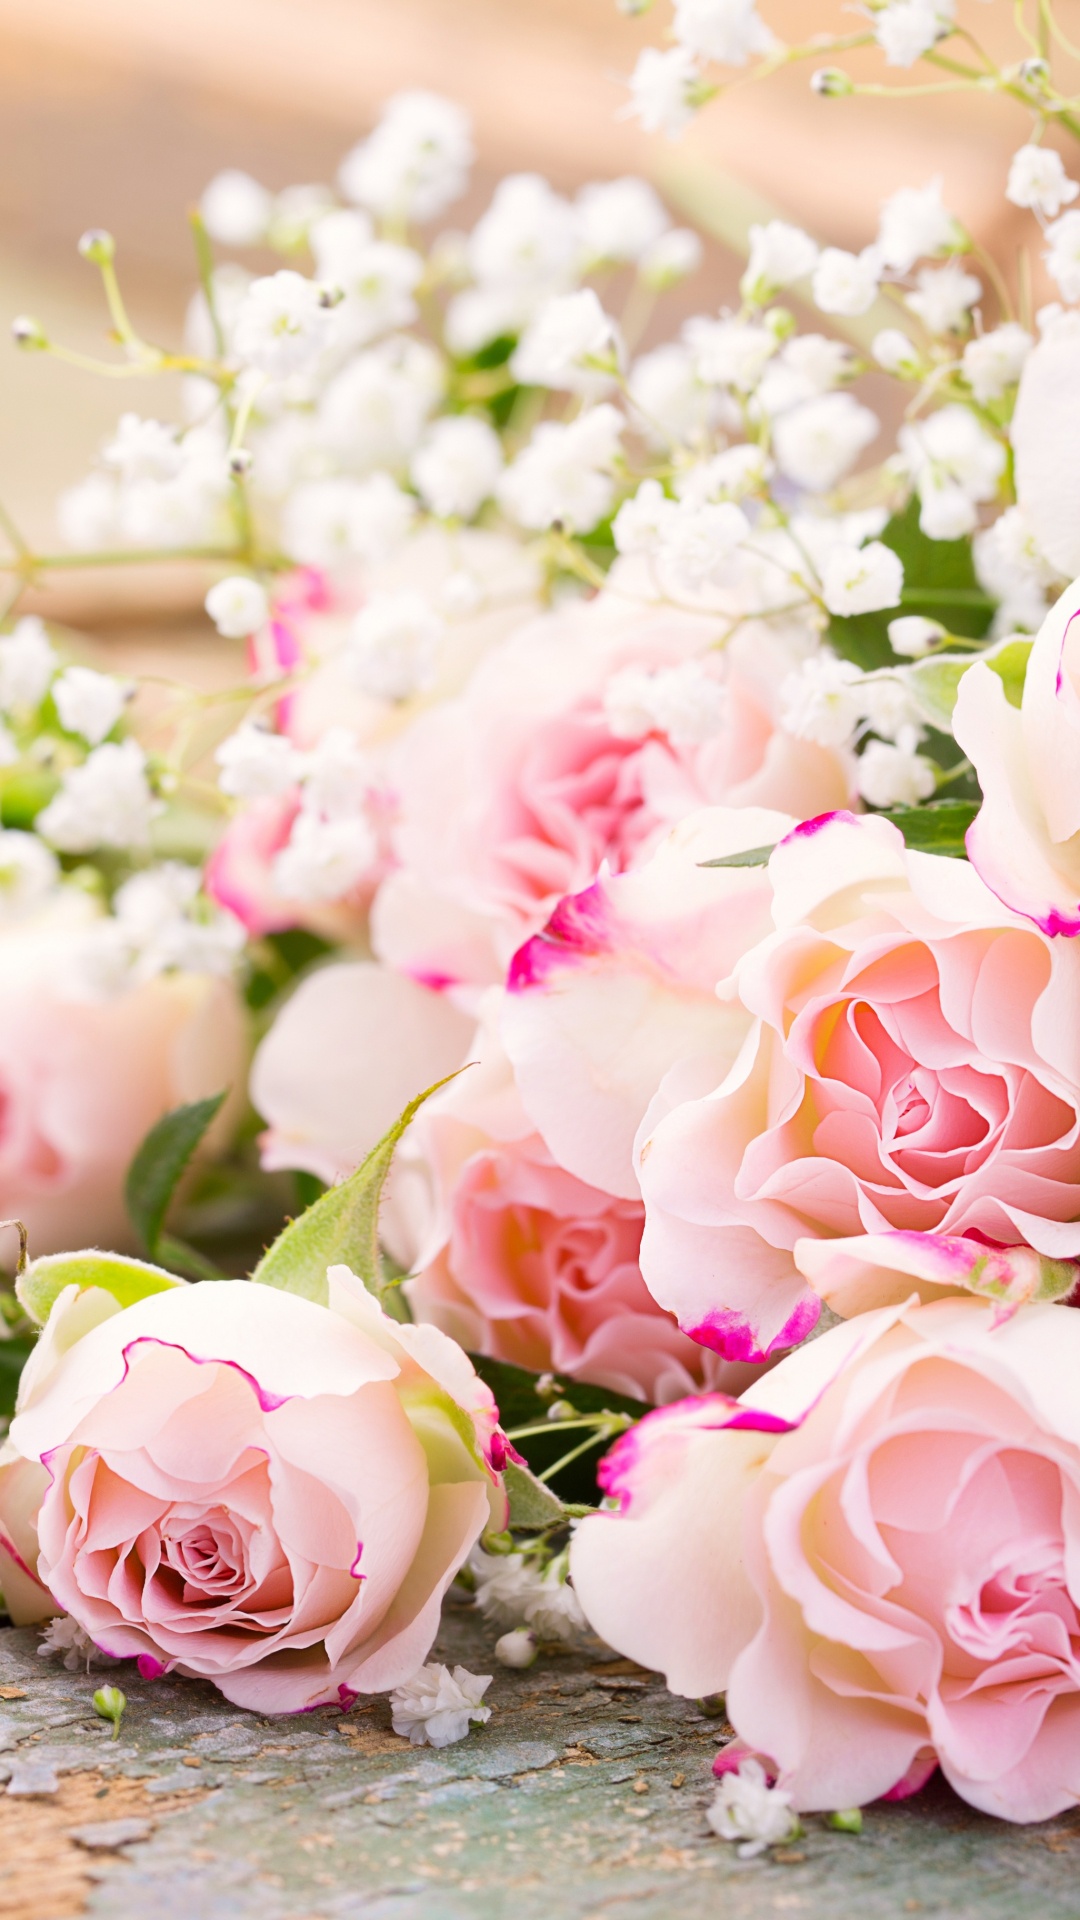 Pink and White Roses Bouquet. Wallpaper in 1080x1920 Resolution